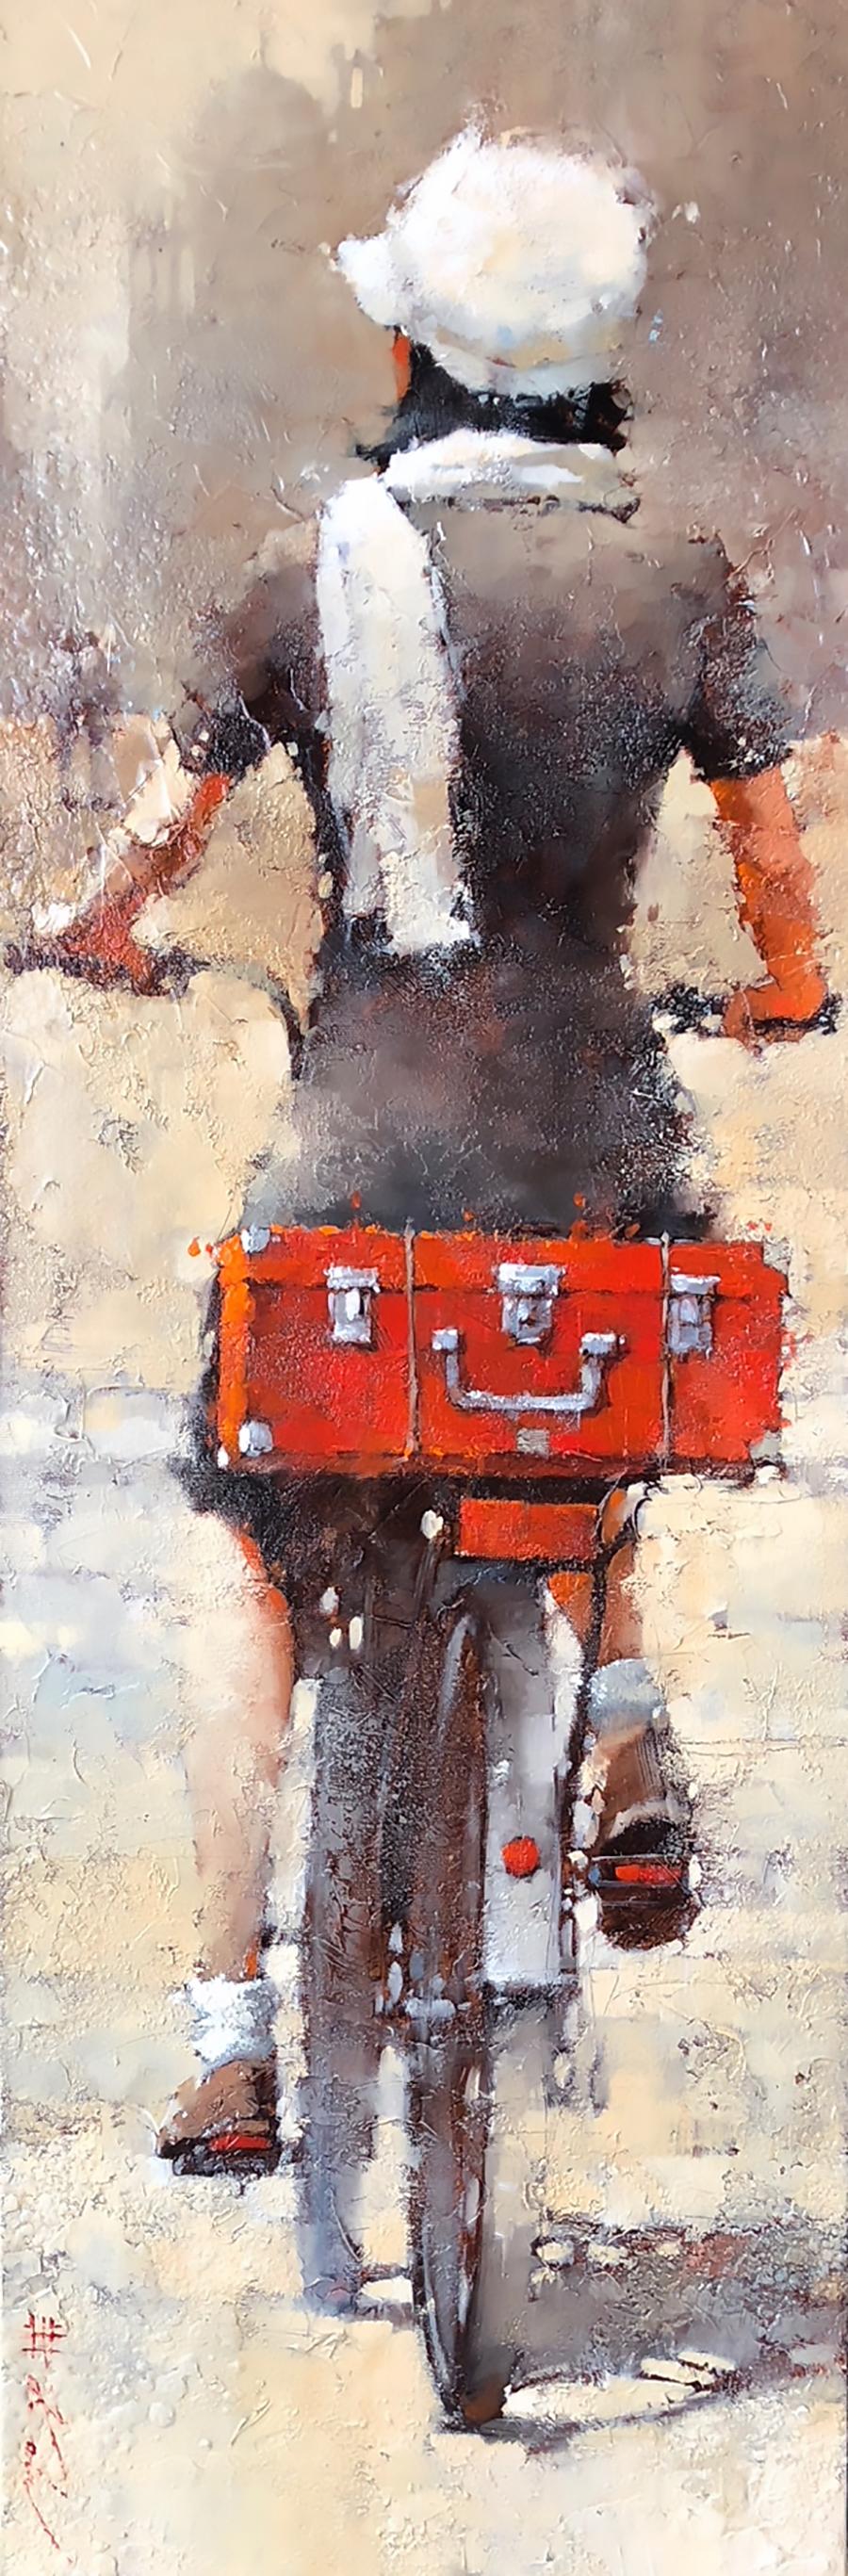 Andre Kohn. "Girl with a Red Suitcase". Figurative Oil on museum wrap canvas.  - Mixed Media Art by Andre Kohn 